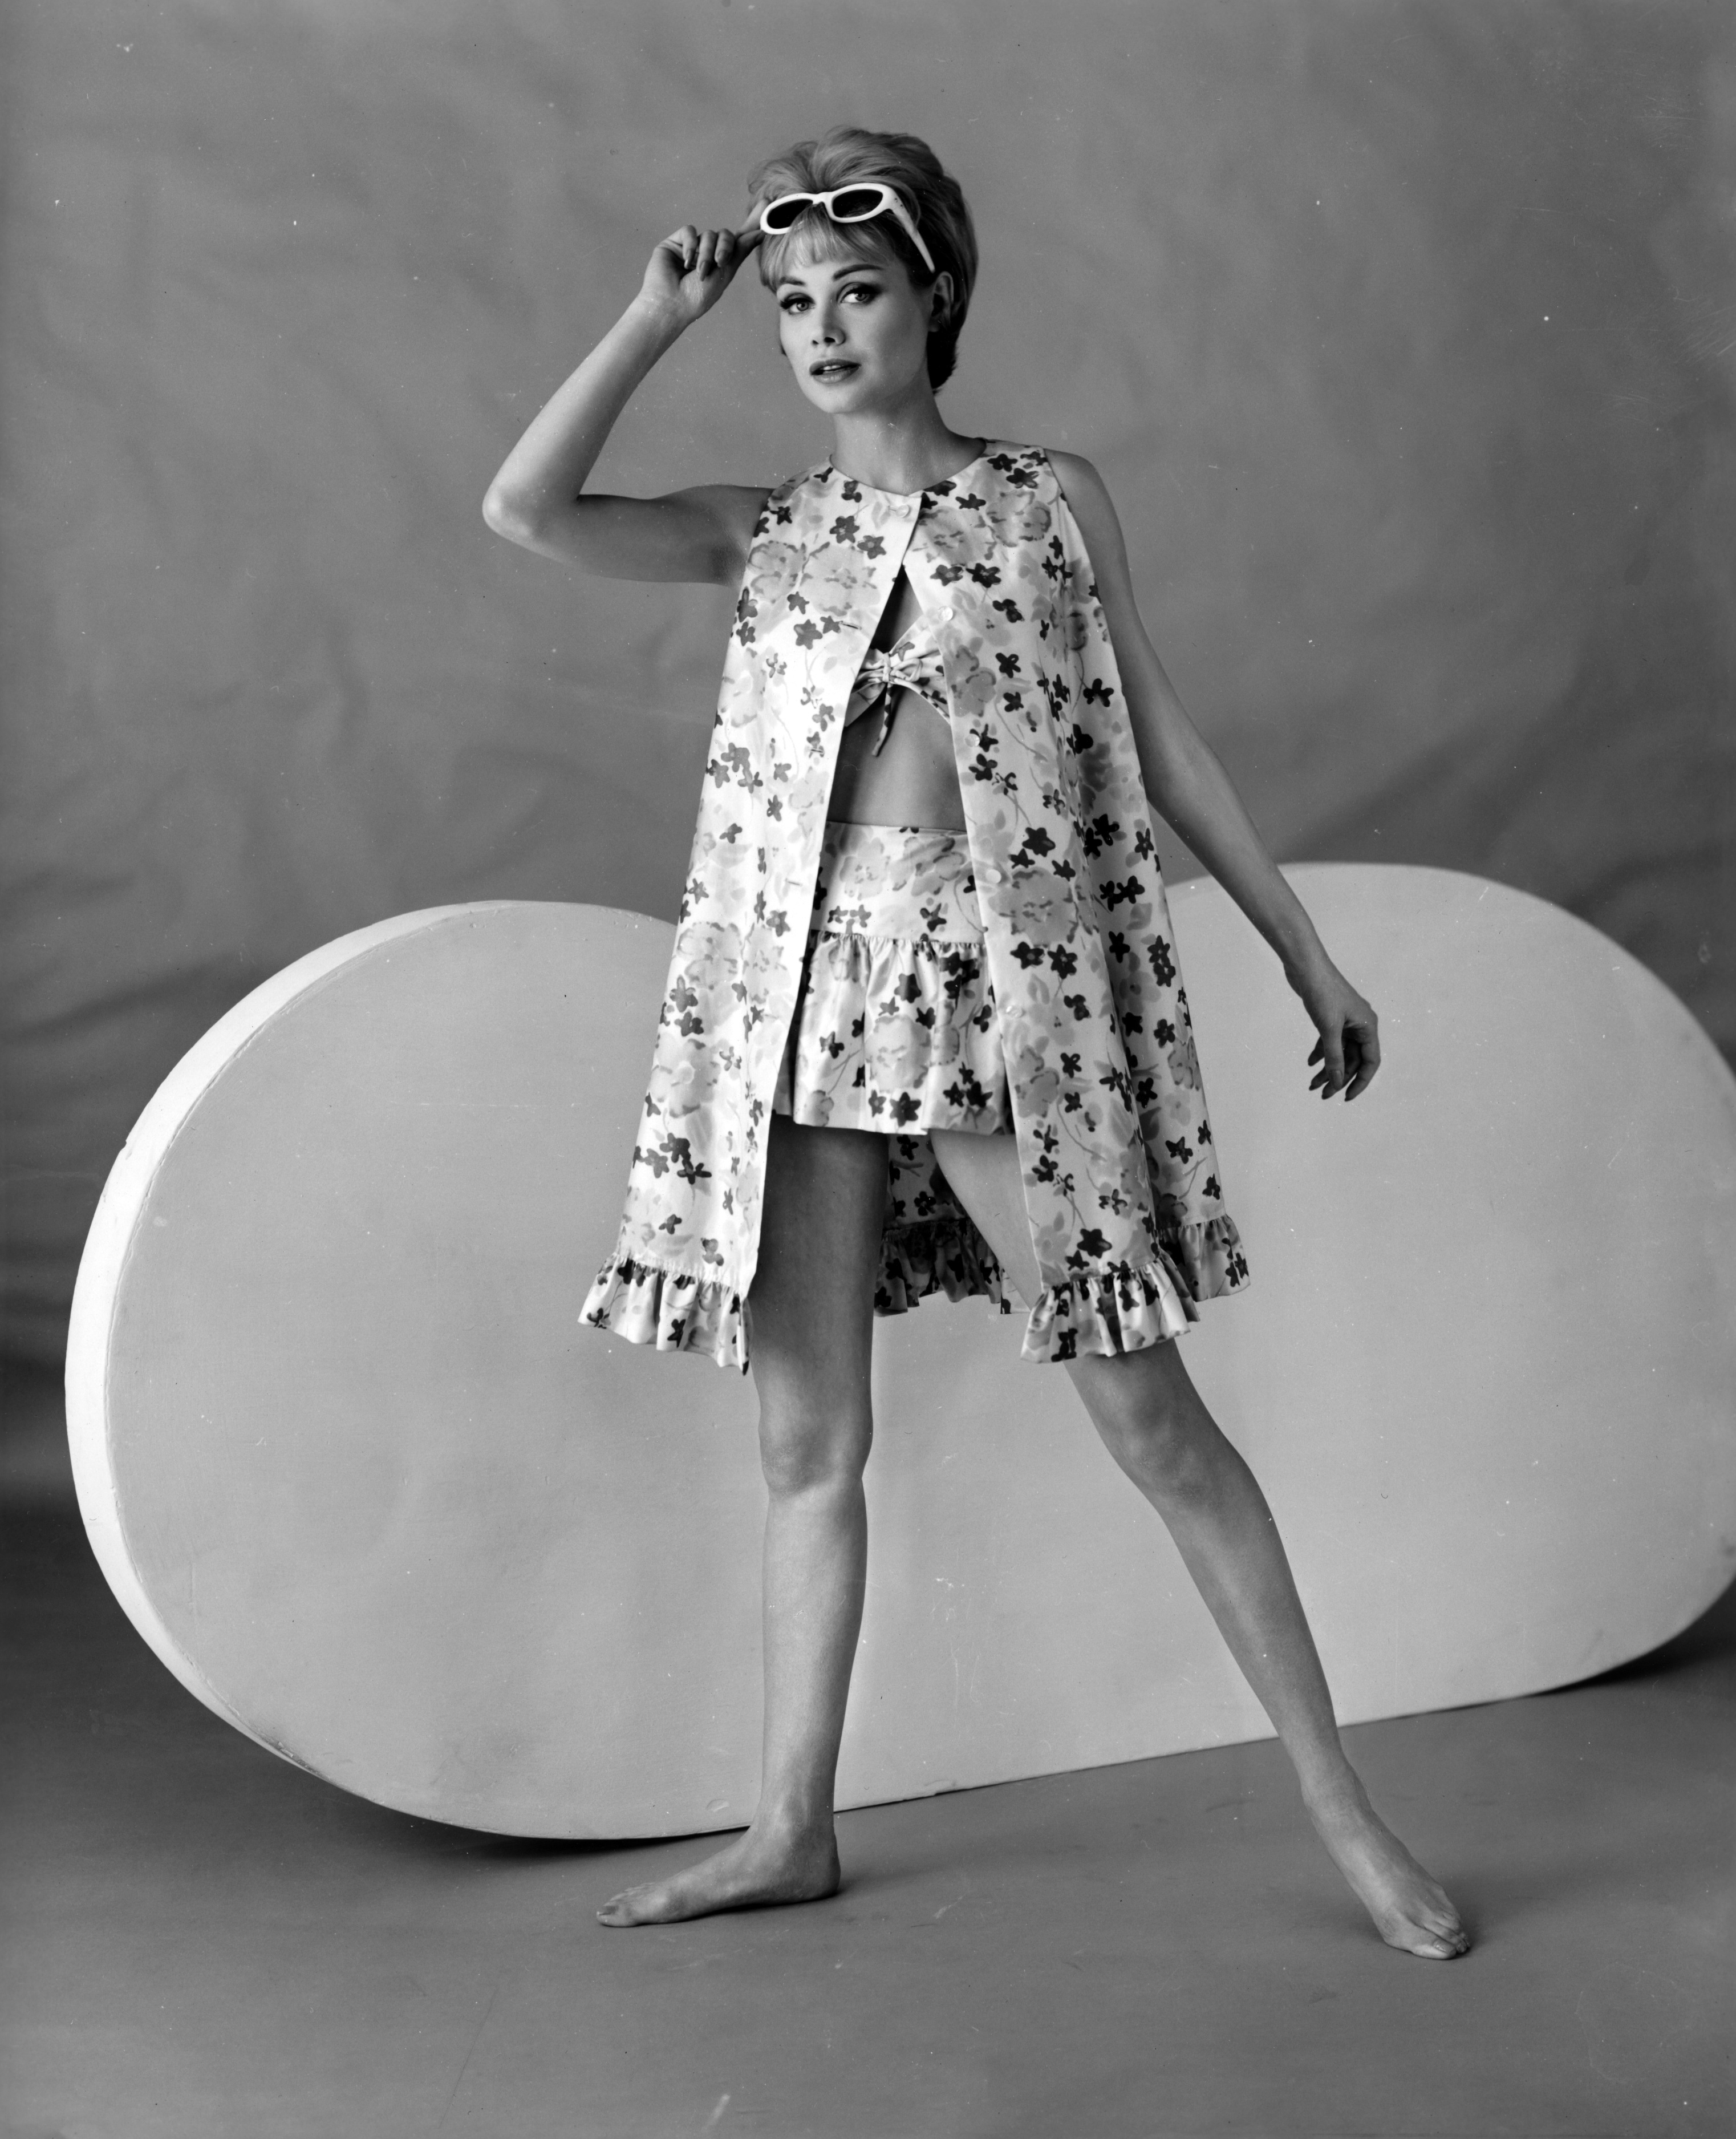 Black and white fashion photo of a woman in a 2-piece bathing suit and cover-up.